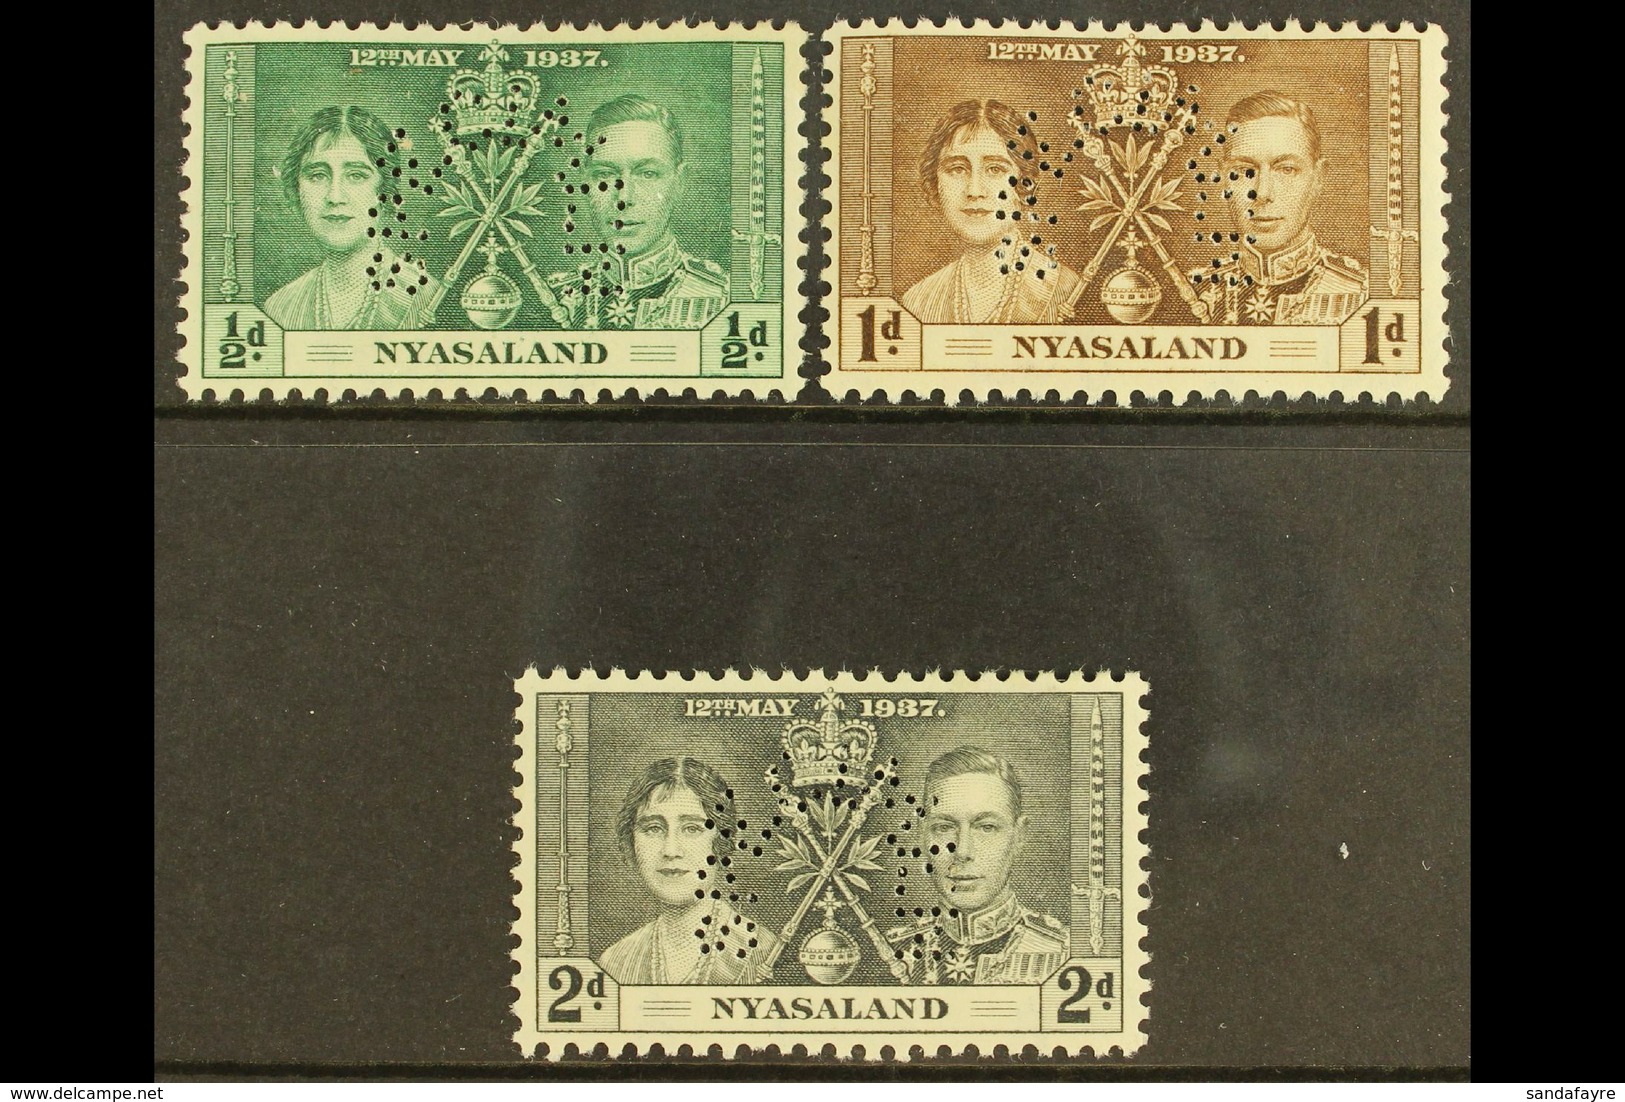 1937 Coronation Set Complete, Perforated "Specimen", SG 127s/129s, Very Fine Mint. (3 Stamps) For More Images, Please Vi - Nyasaland (1907-1953)